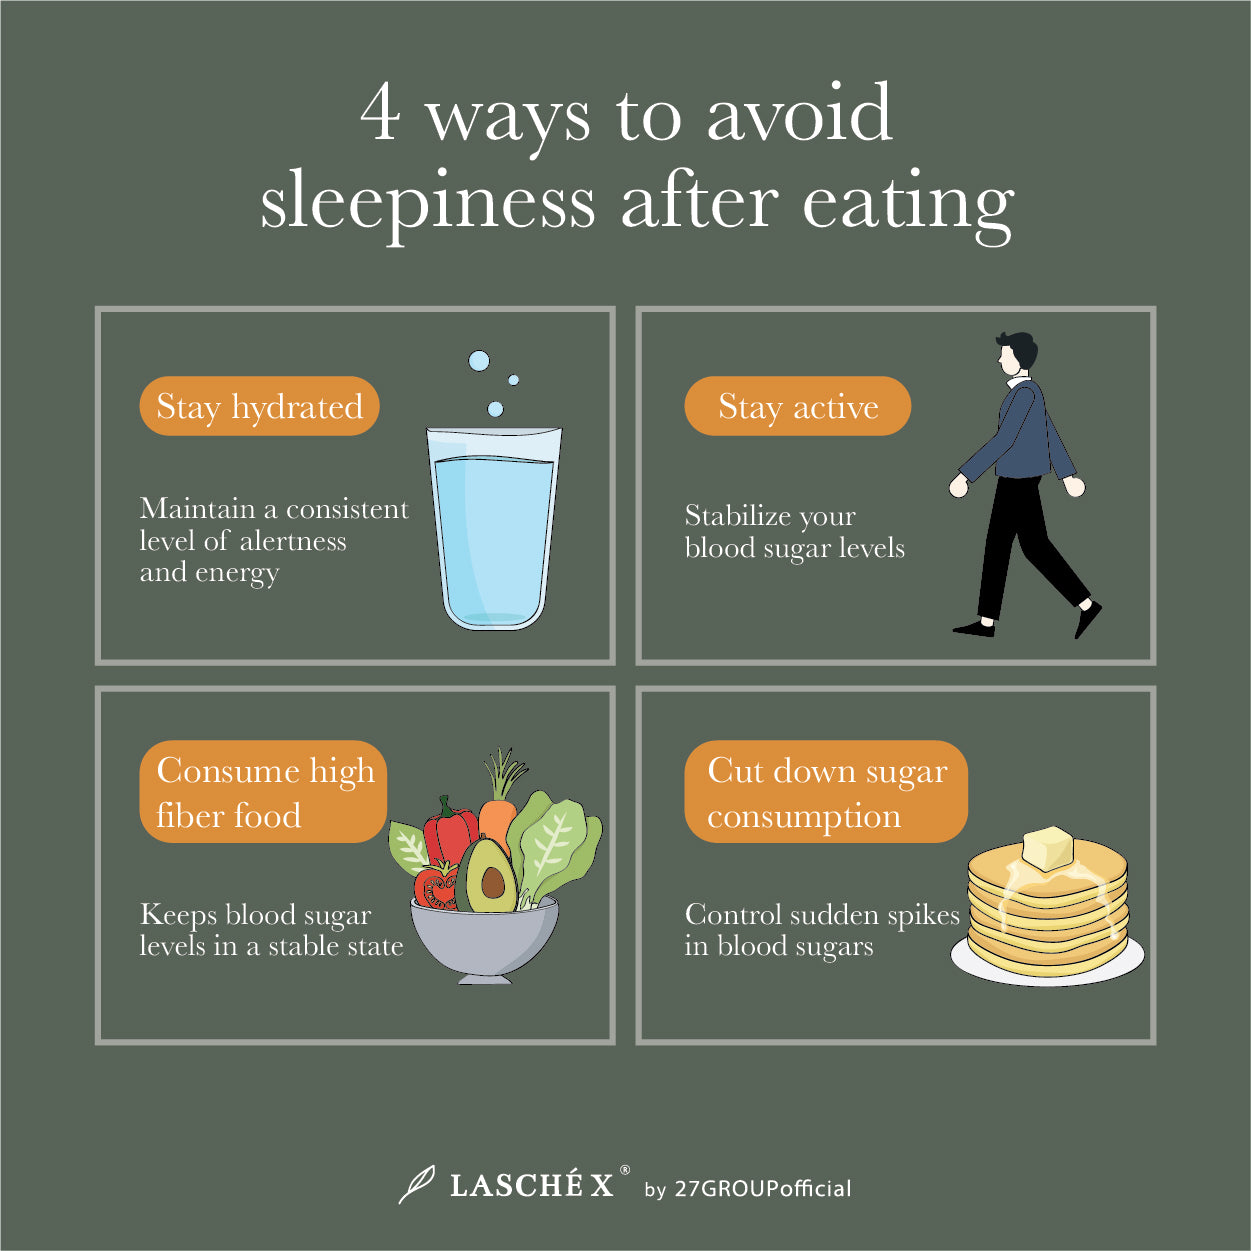 4 ways to avoid sleepiness after eating